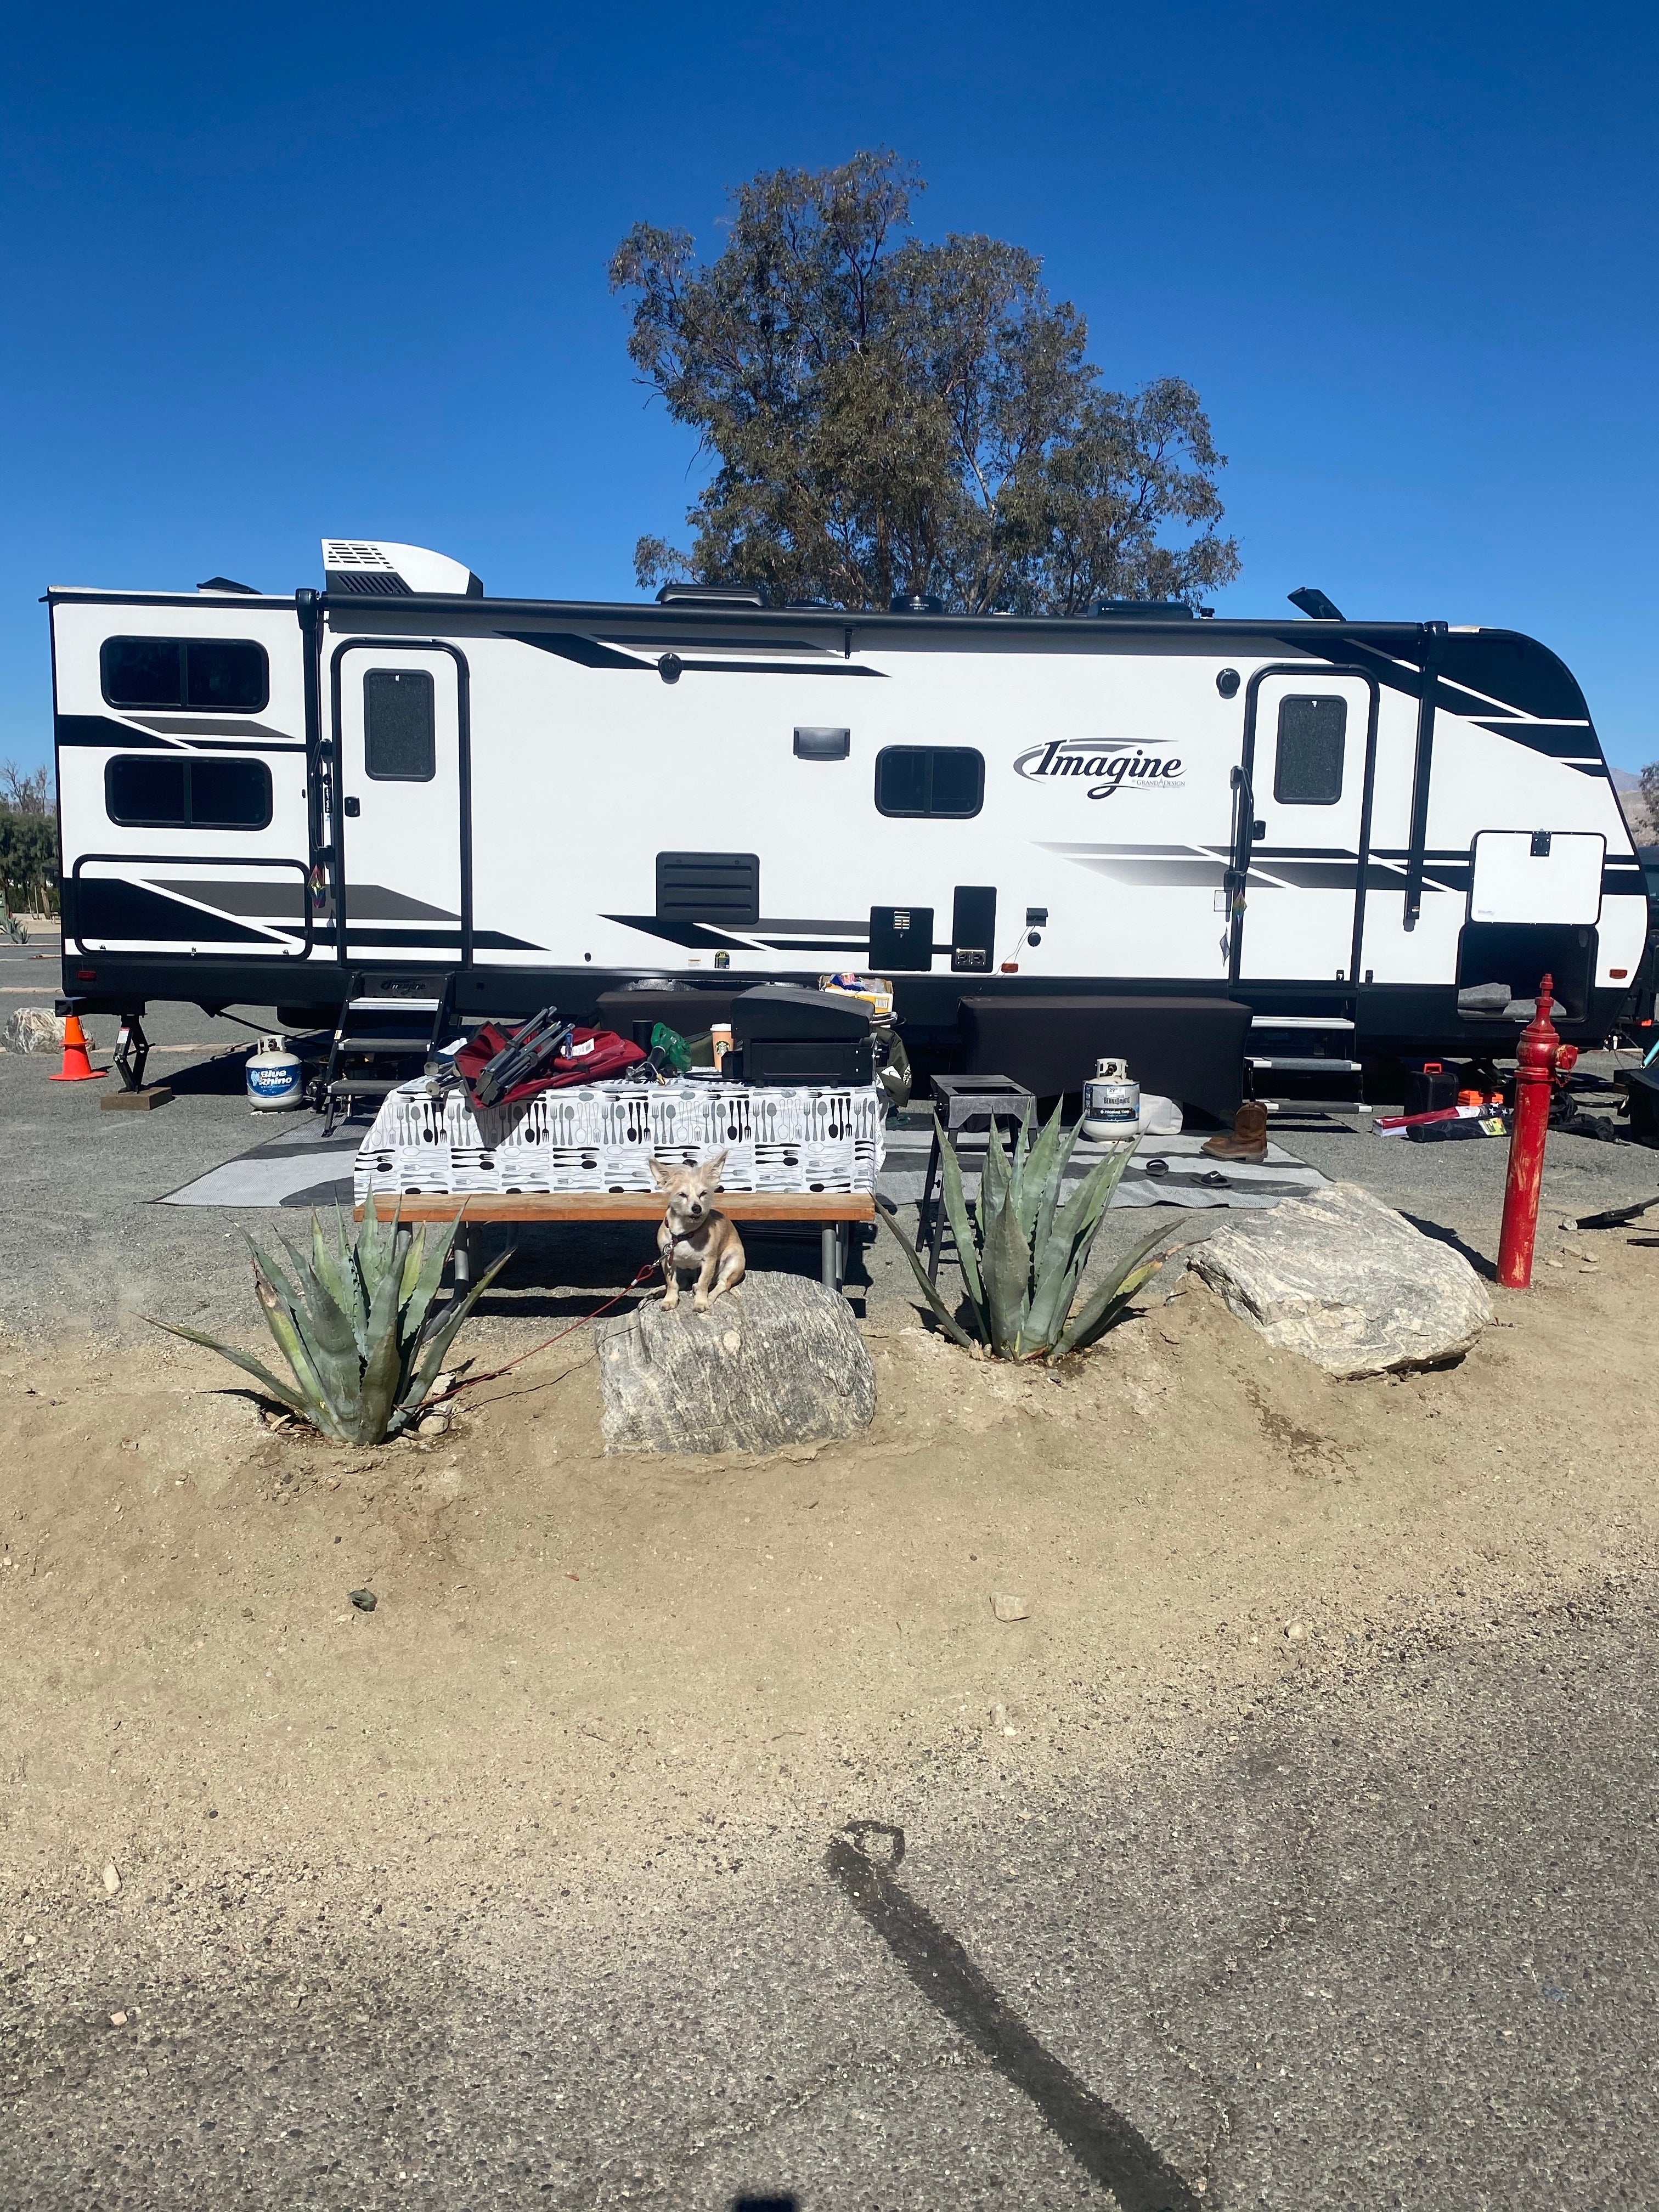 Camper submitted image from Palm Springs-Joshua Tree KOA - 5